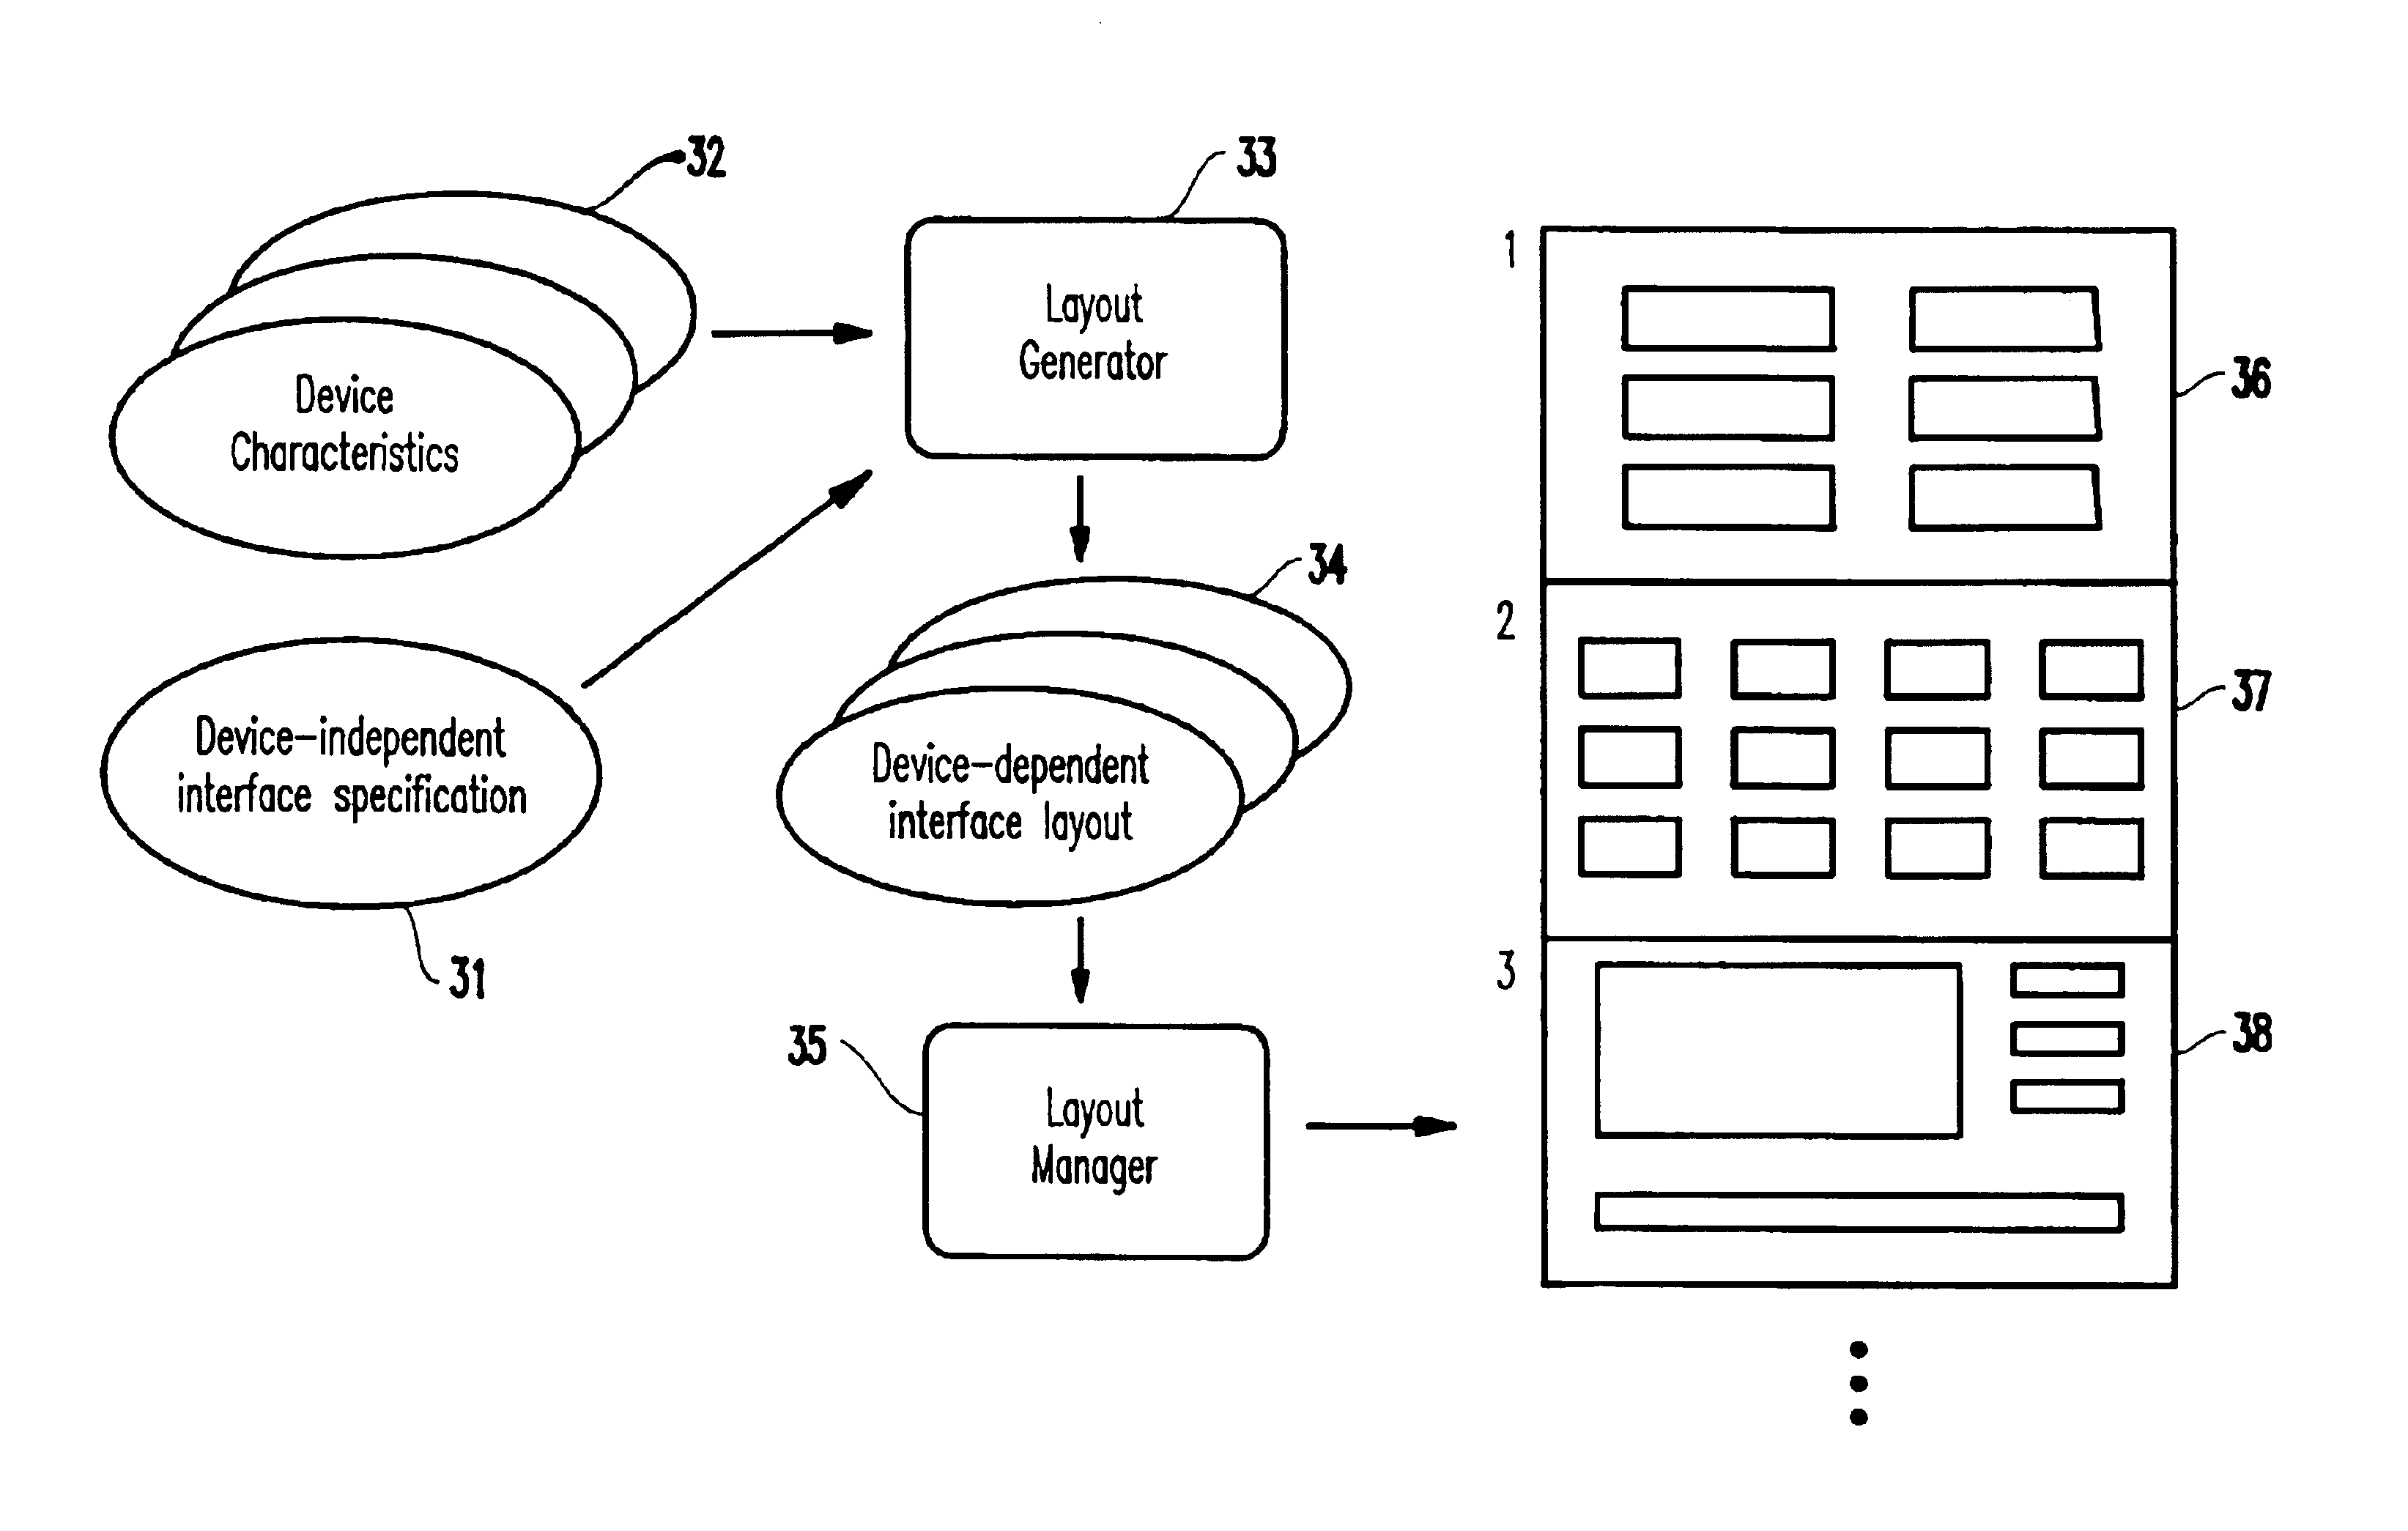 Method and apparatus for synchronized previewing user-interface appearance on multiple platforms